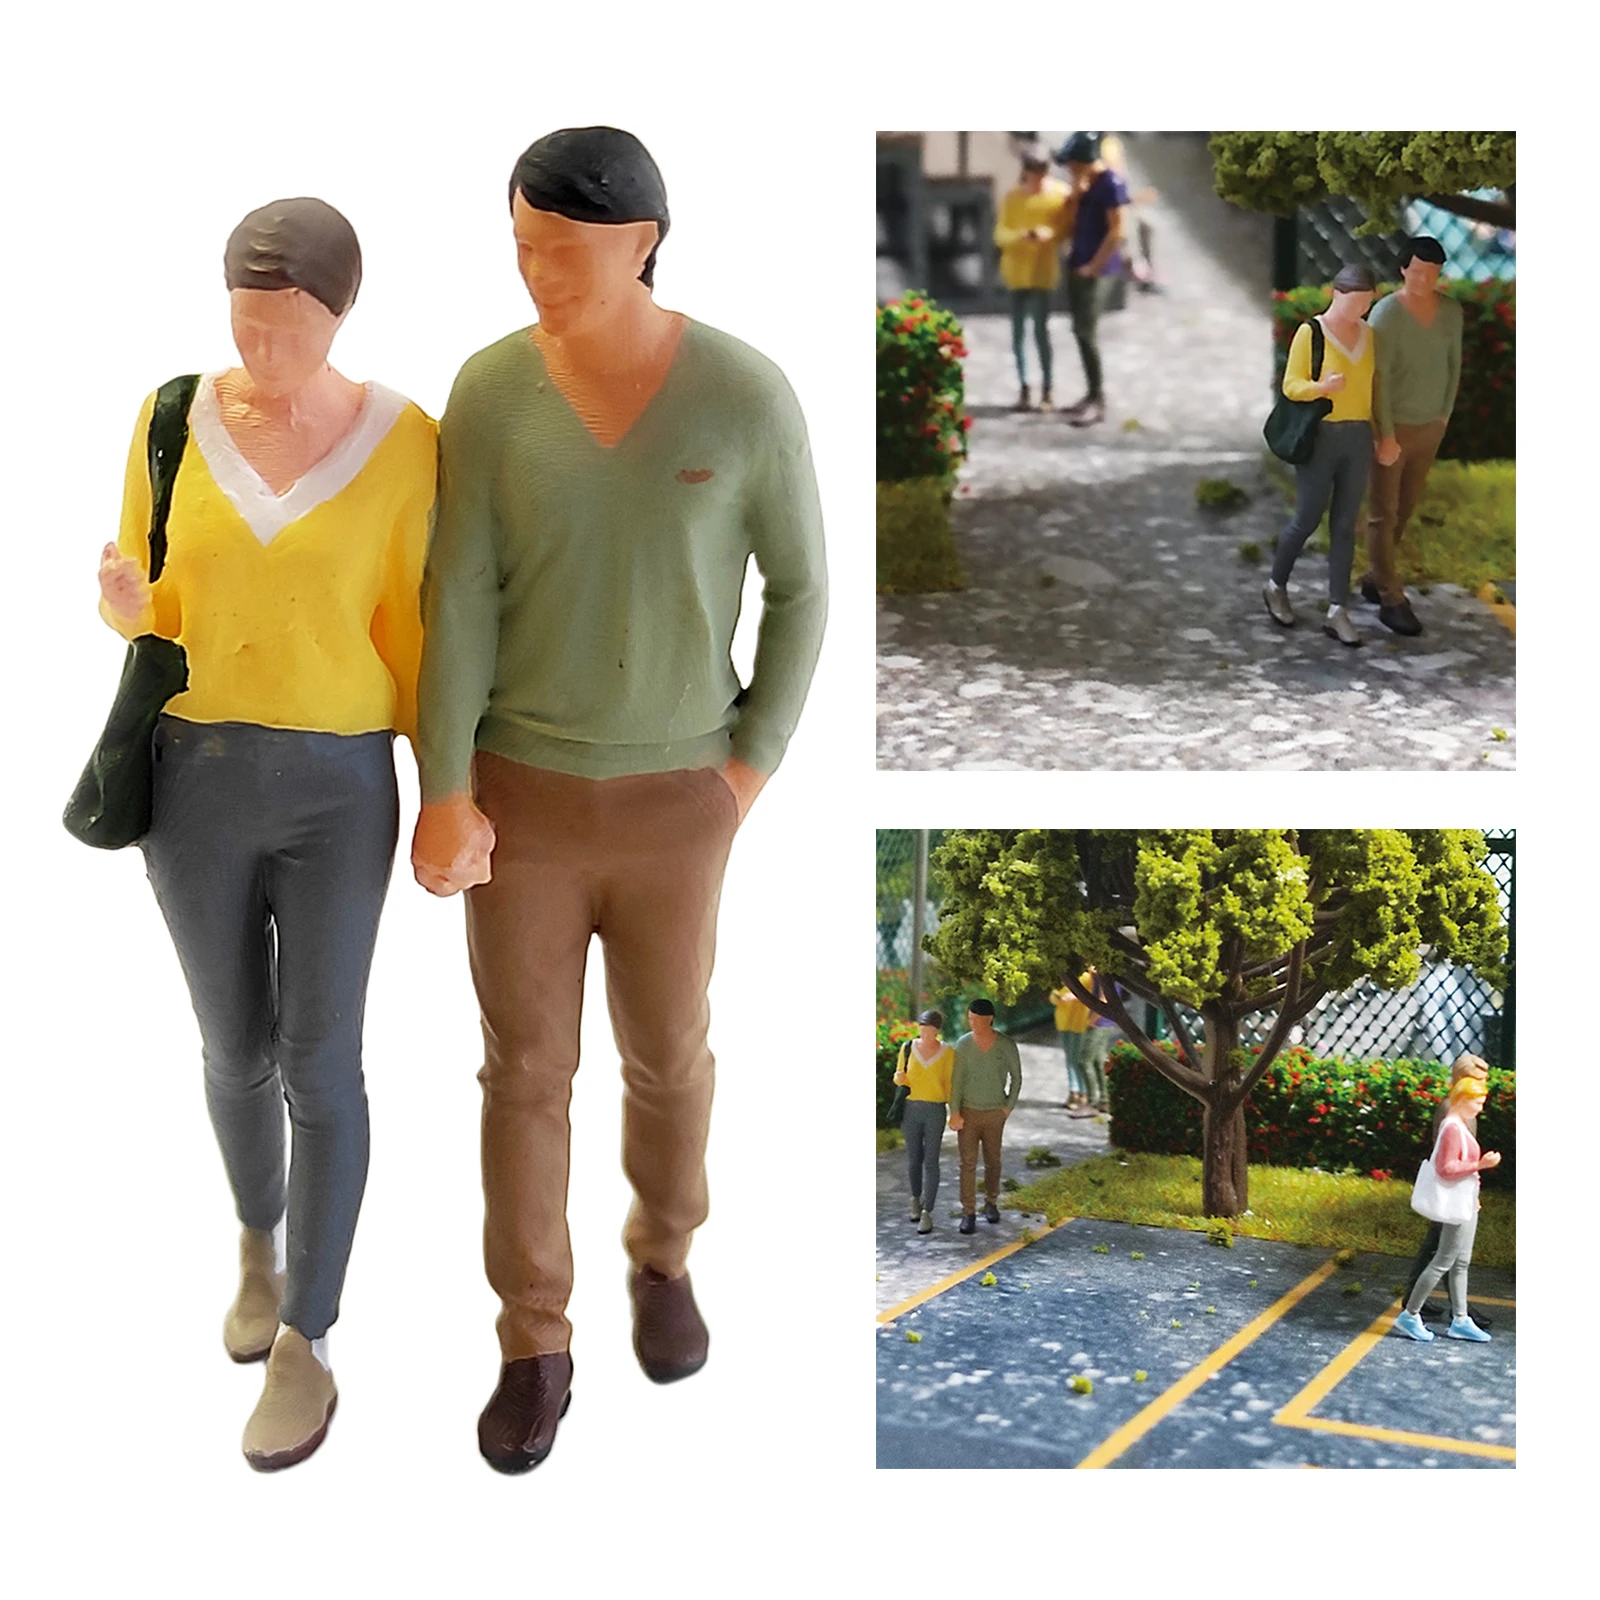 1:64 Scale Hand Painted Miniature Model Couple Figures Street Park Layout Diorama